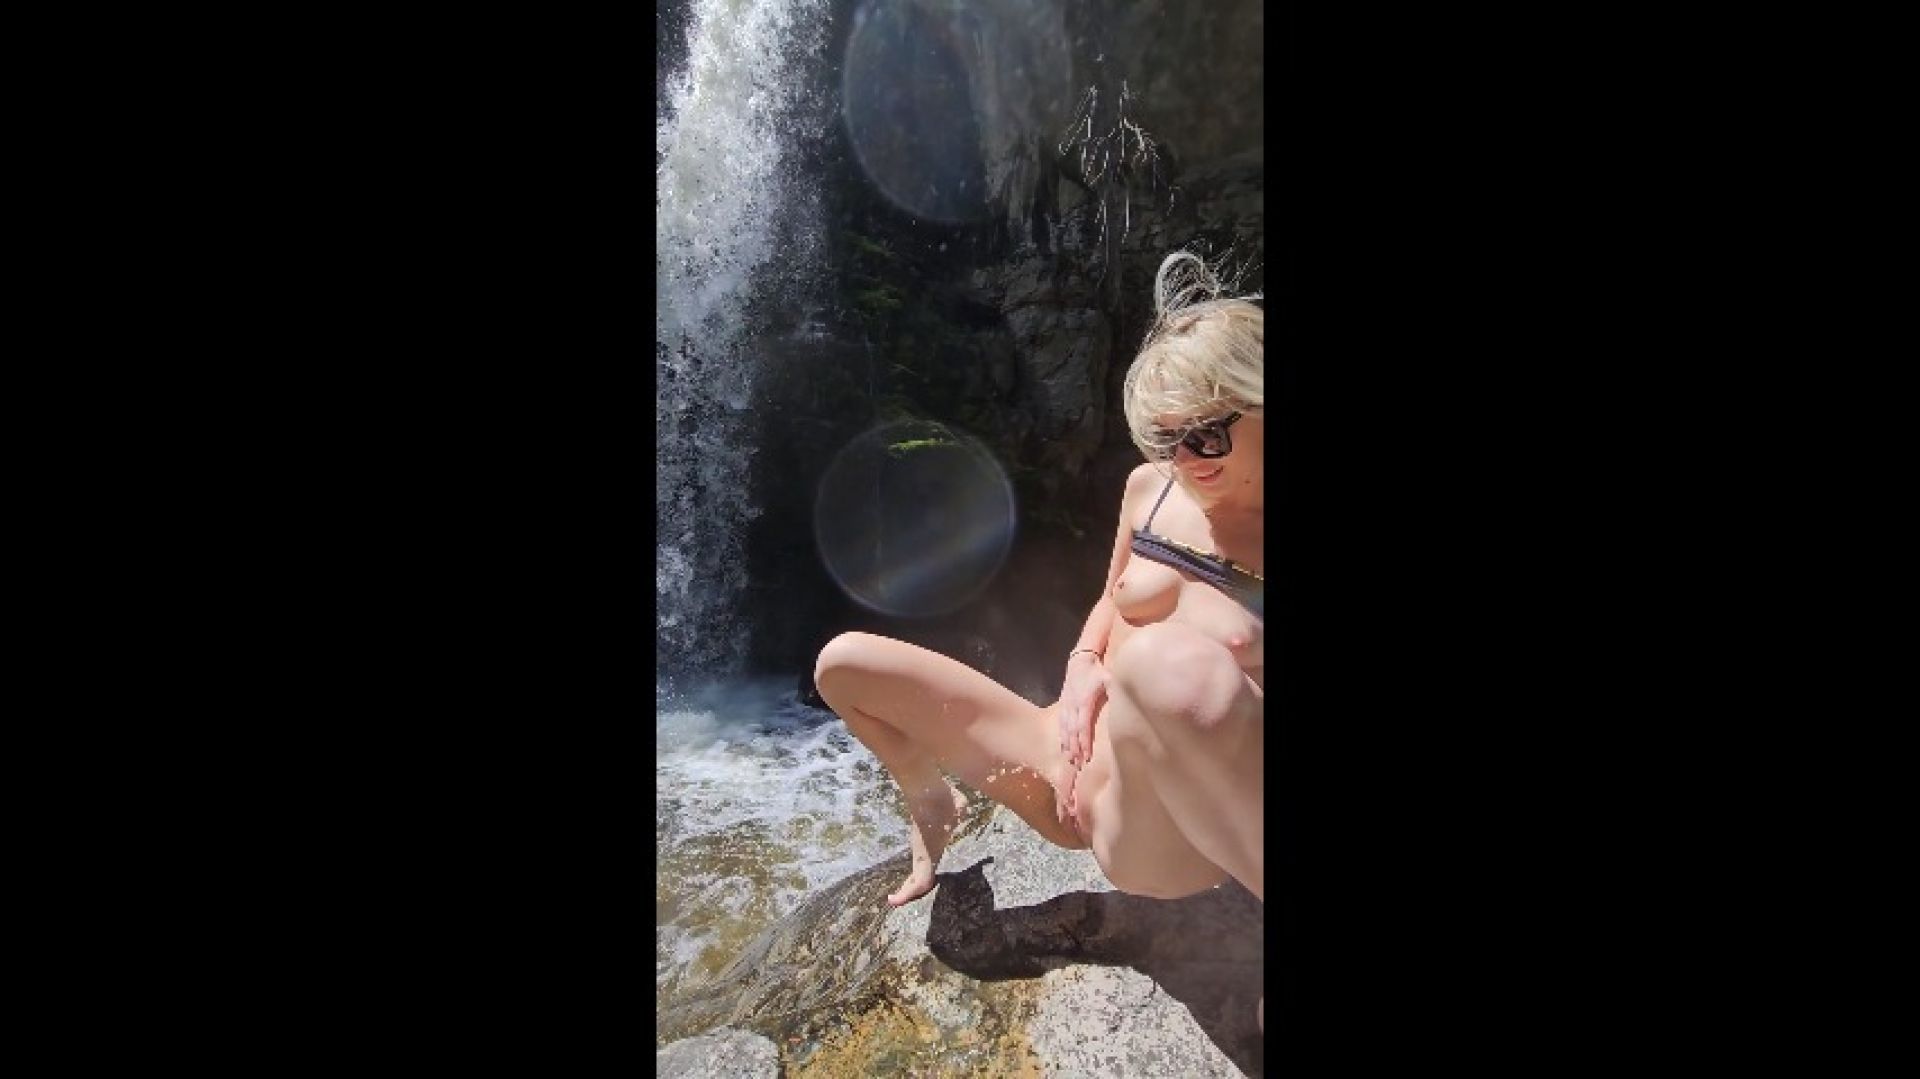 Attempt to Pee into a Waterfall